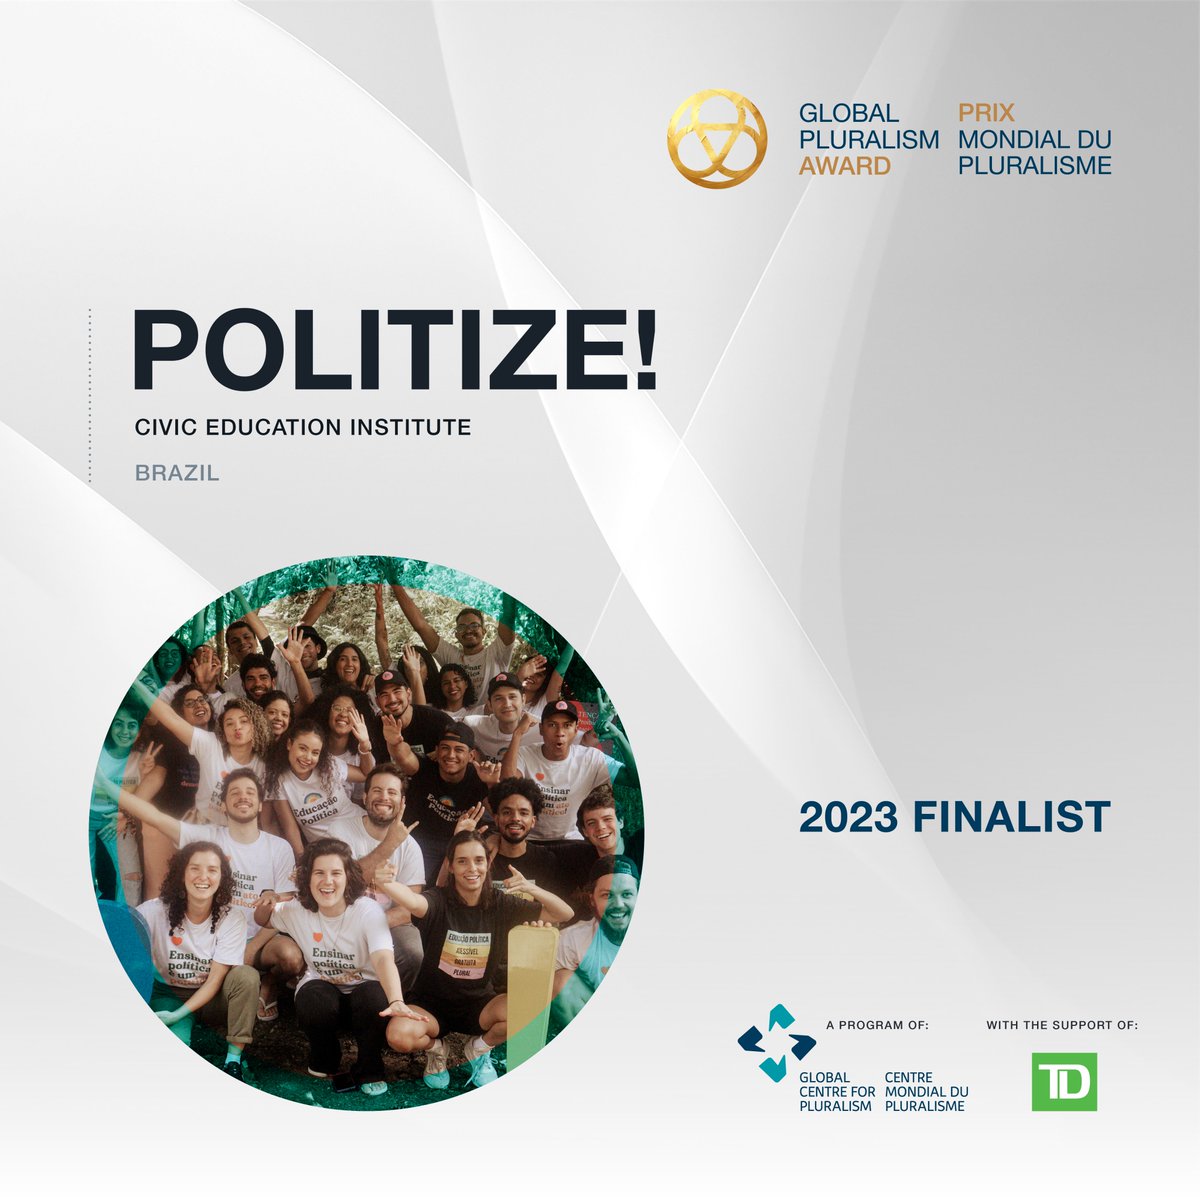 ✨We’ve been selected as a finalist for #GlobalPluralismAward! Very excited to be recognized for our work in promoting inclusive civic participation and dialogue among Brazil's youth. Let's keep empowering the leaders of tomorrow! @GlobalPluralism #pluralisminaction